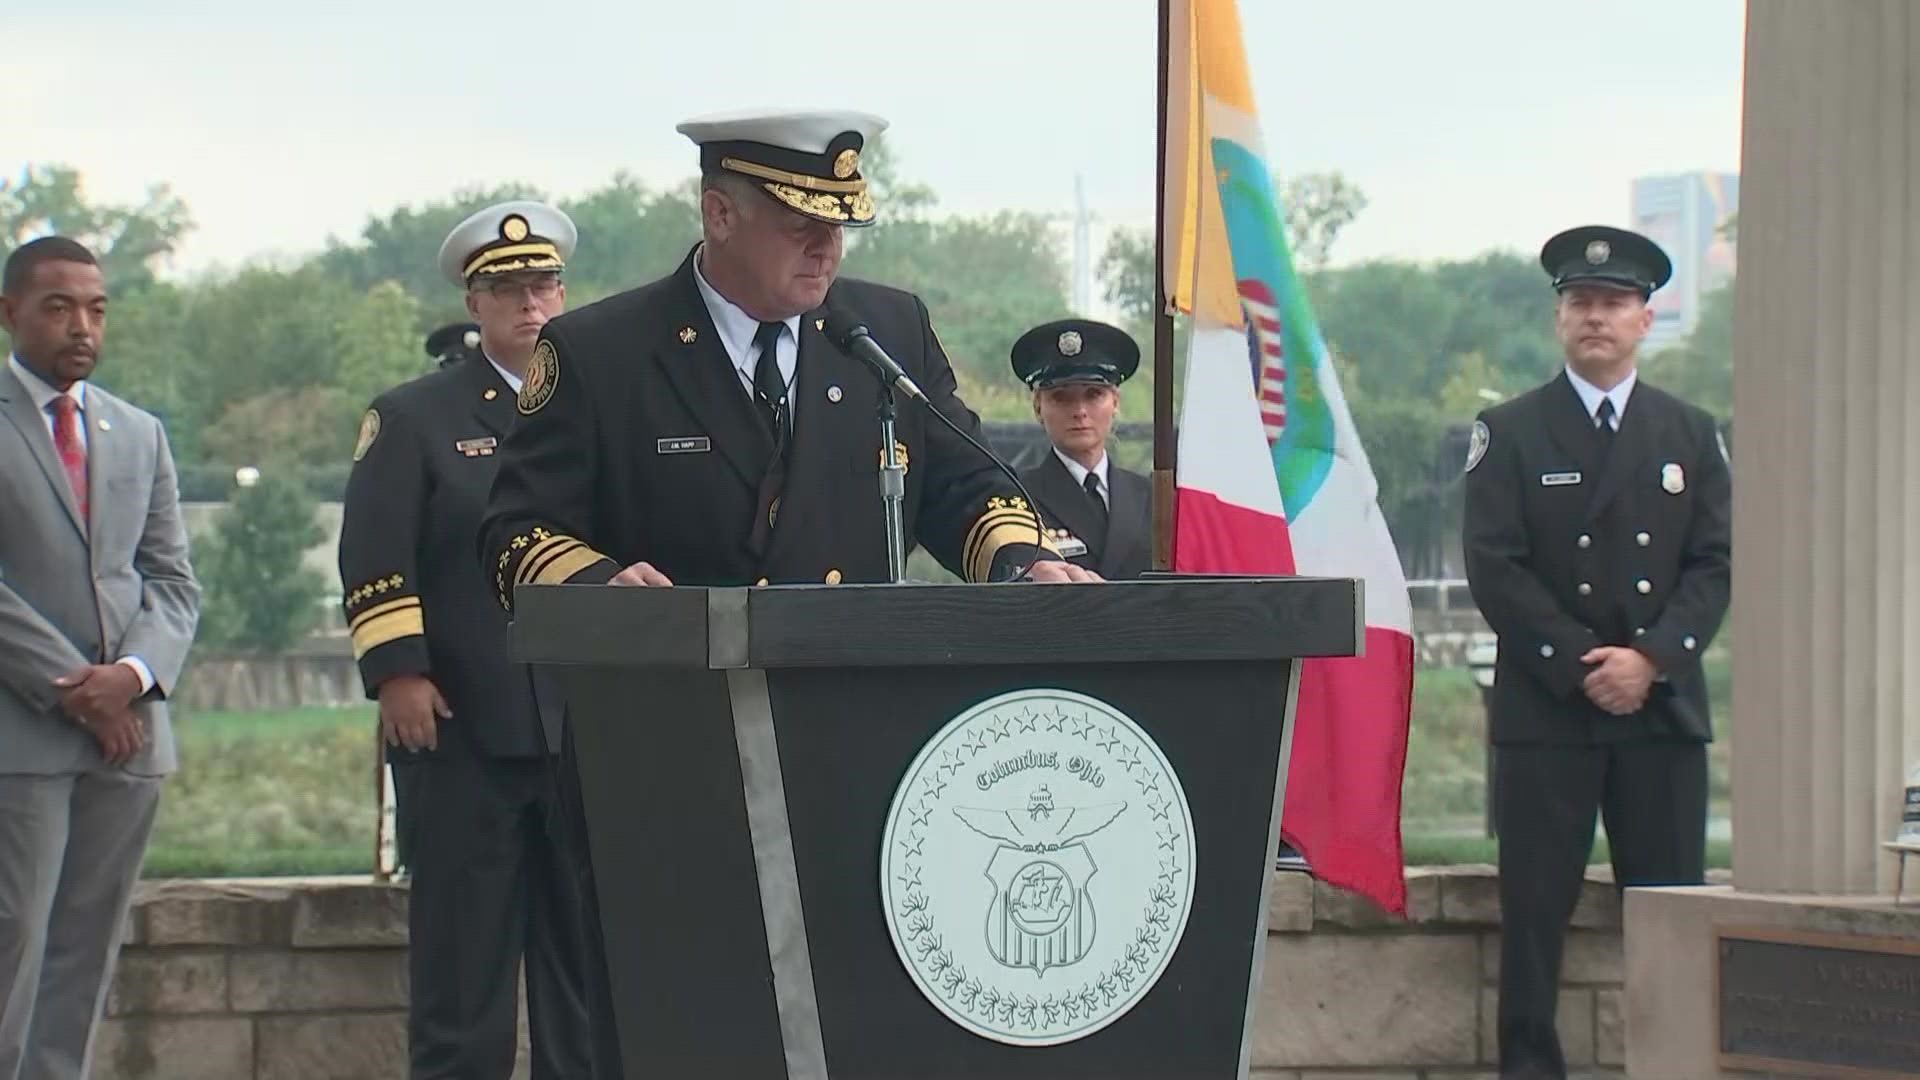 Fire Chief Jeff Hapa delivers remarks to honor the men and women who committed their lives to the Columbus Division of Fire.